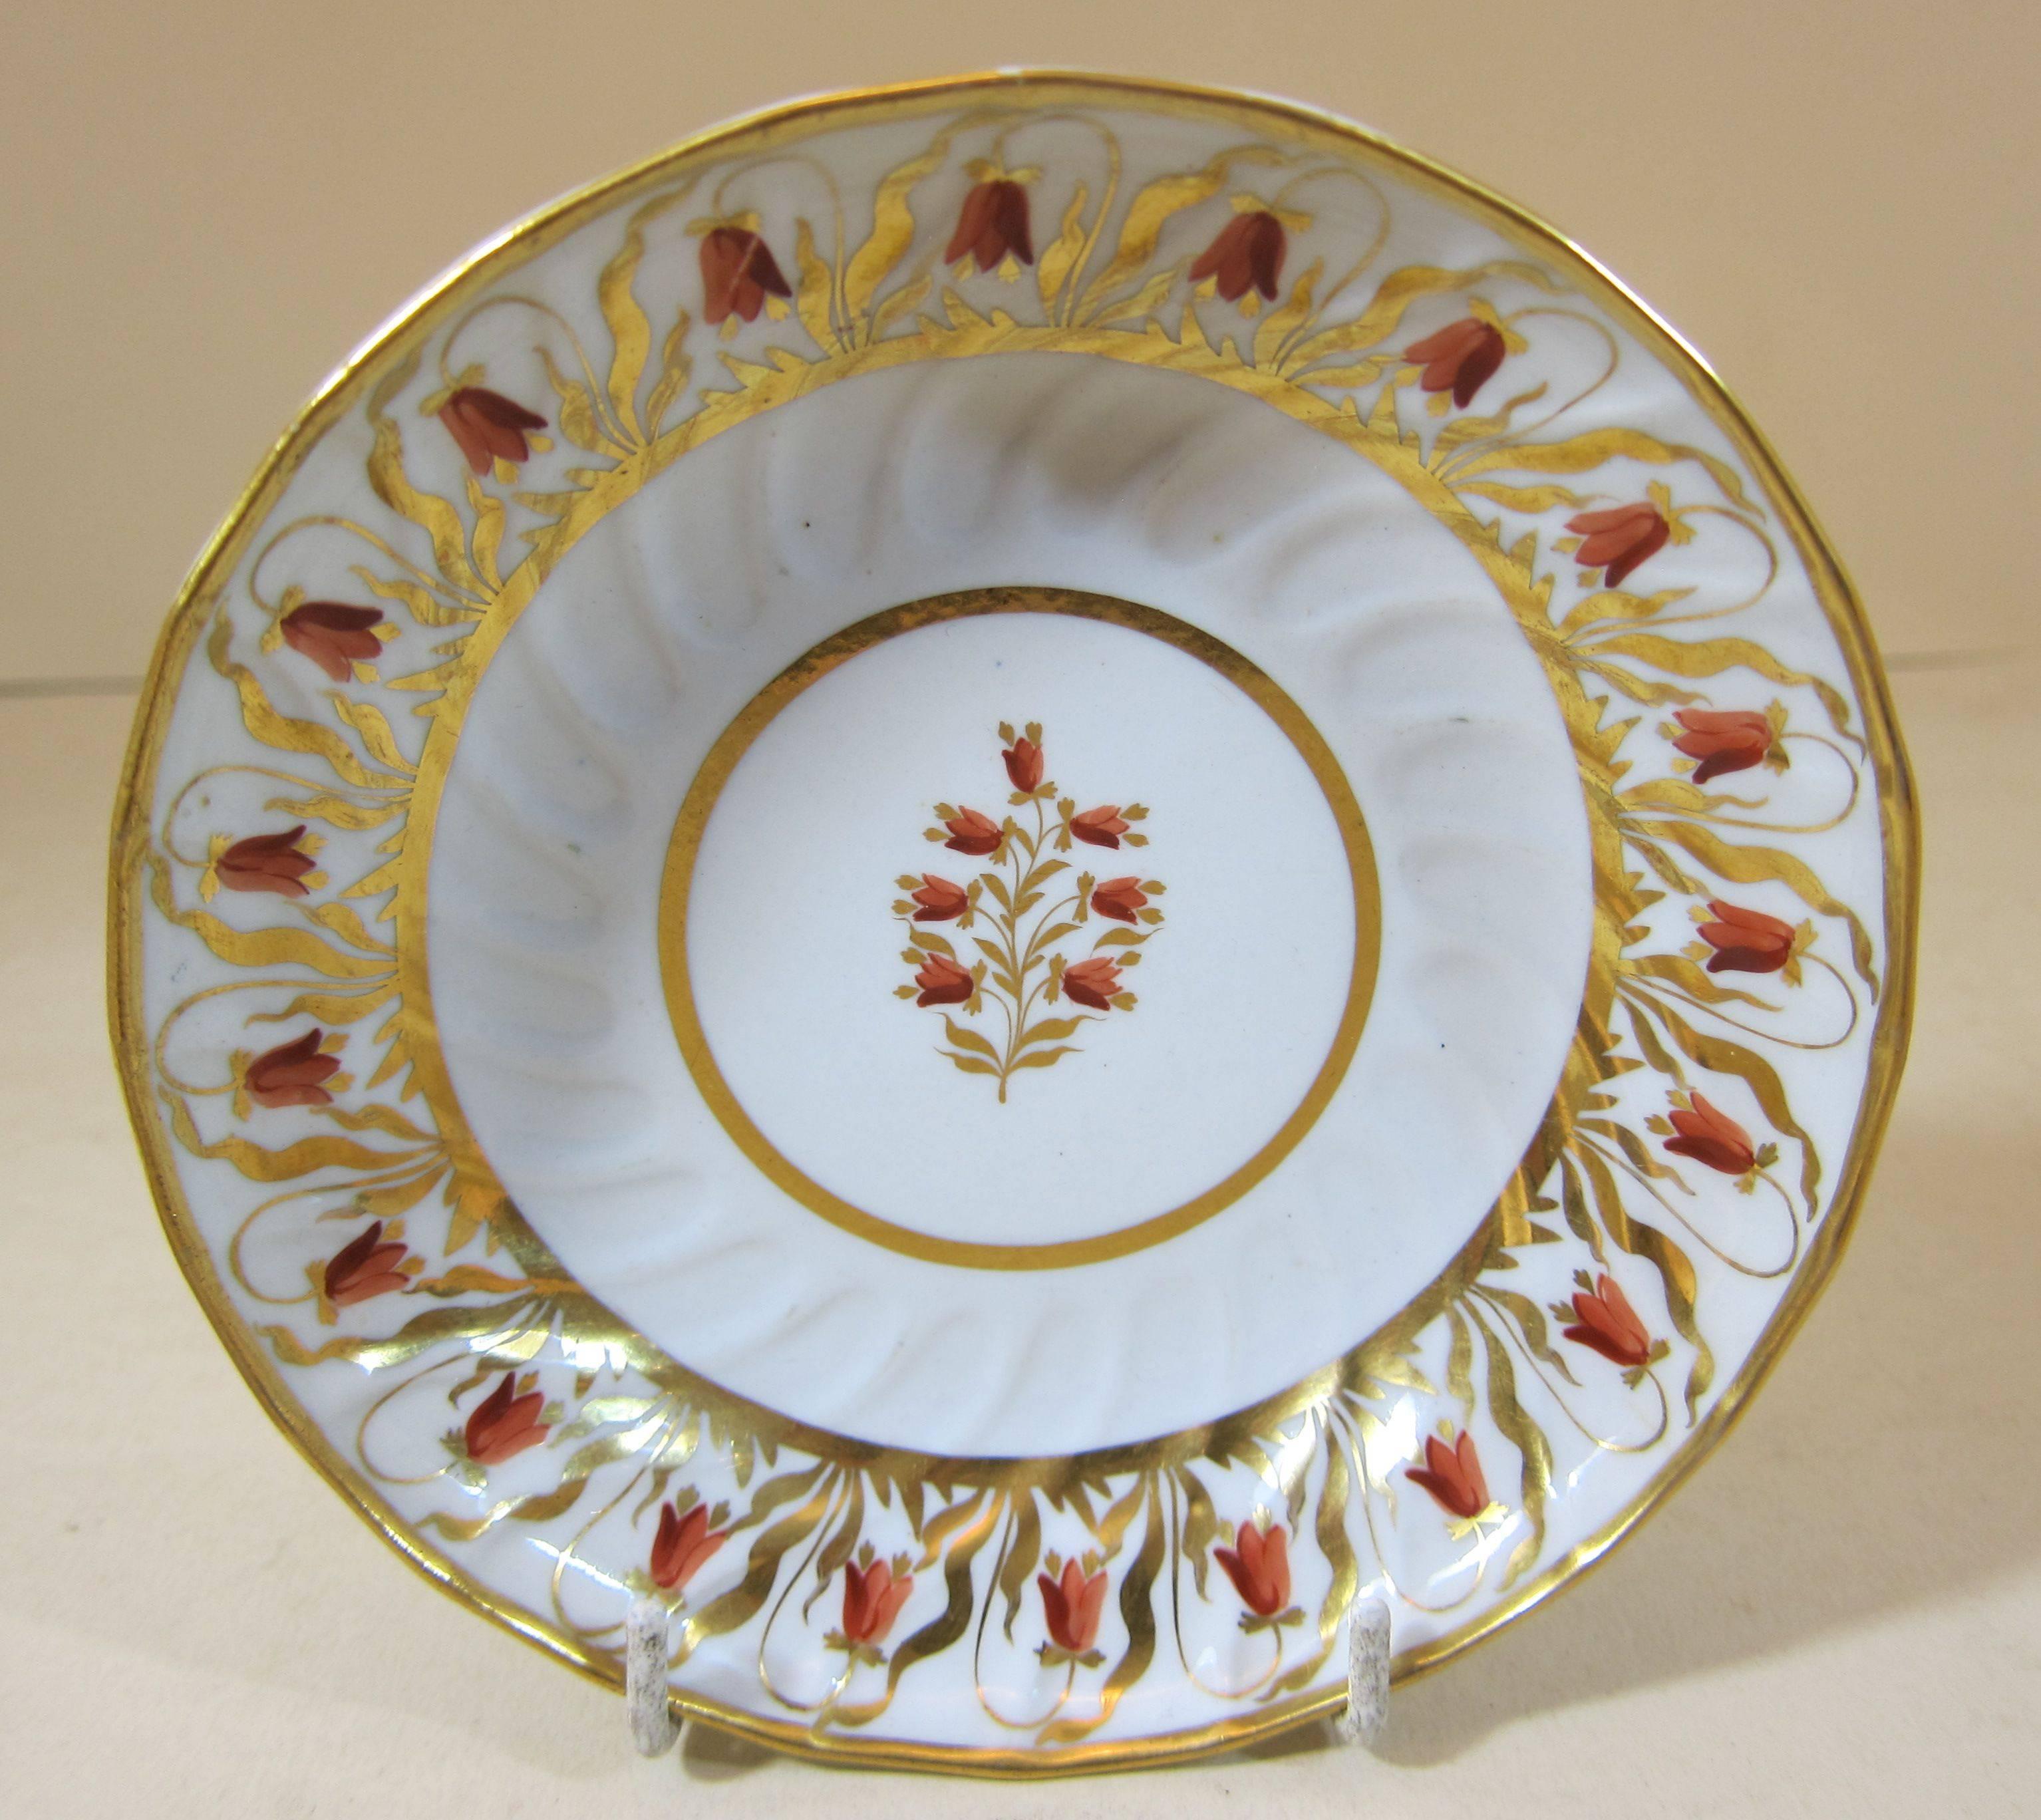 Coalport (worked from circa 1795)
An antique Coalport Porcelain fluted tea bowl and saucer decorated with gilt and orange harebells.